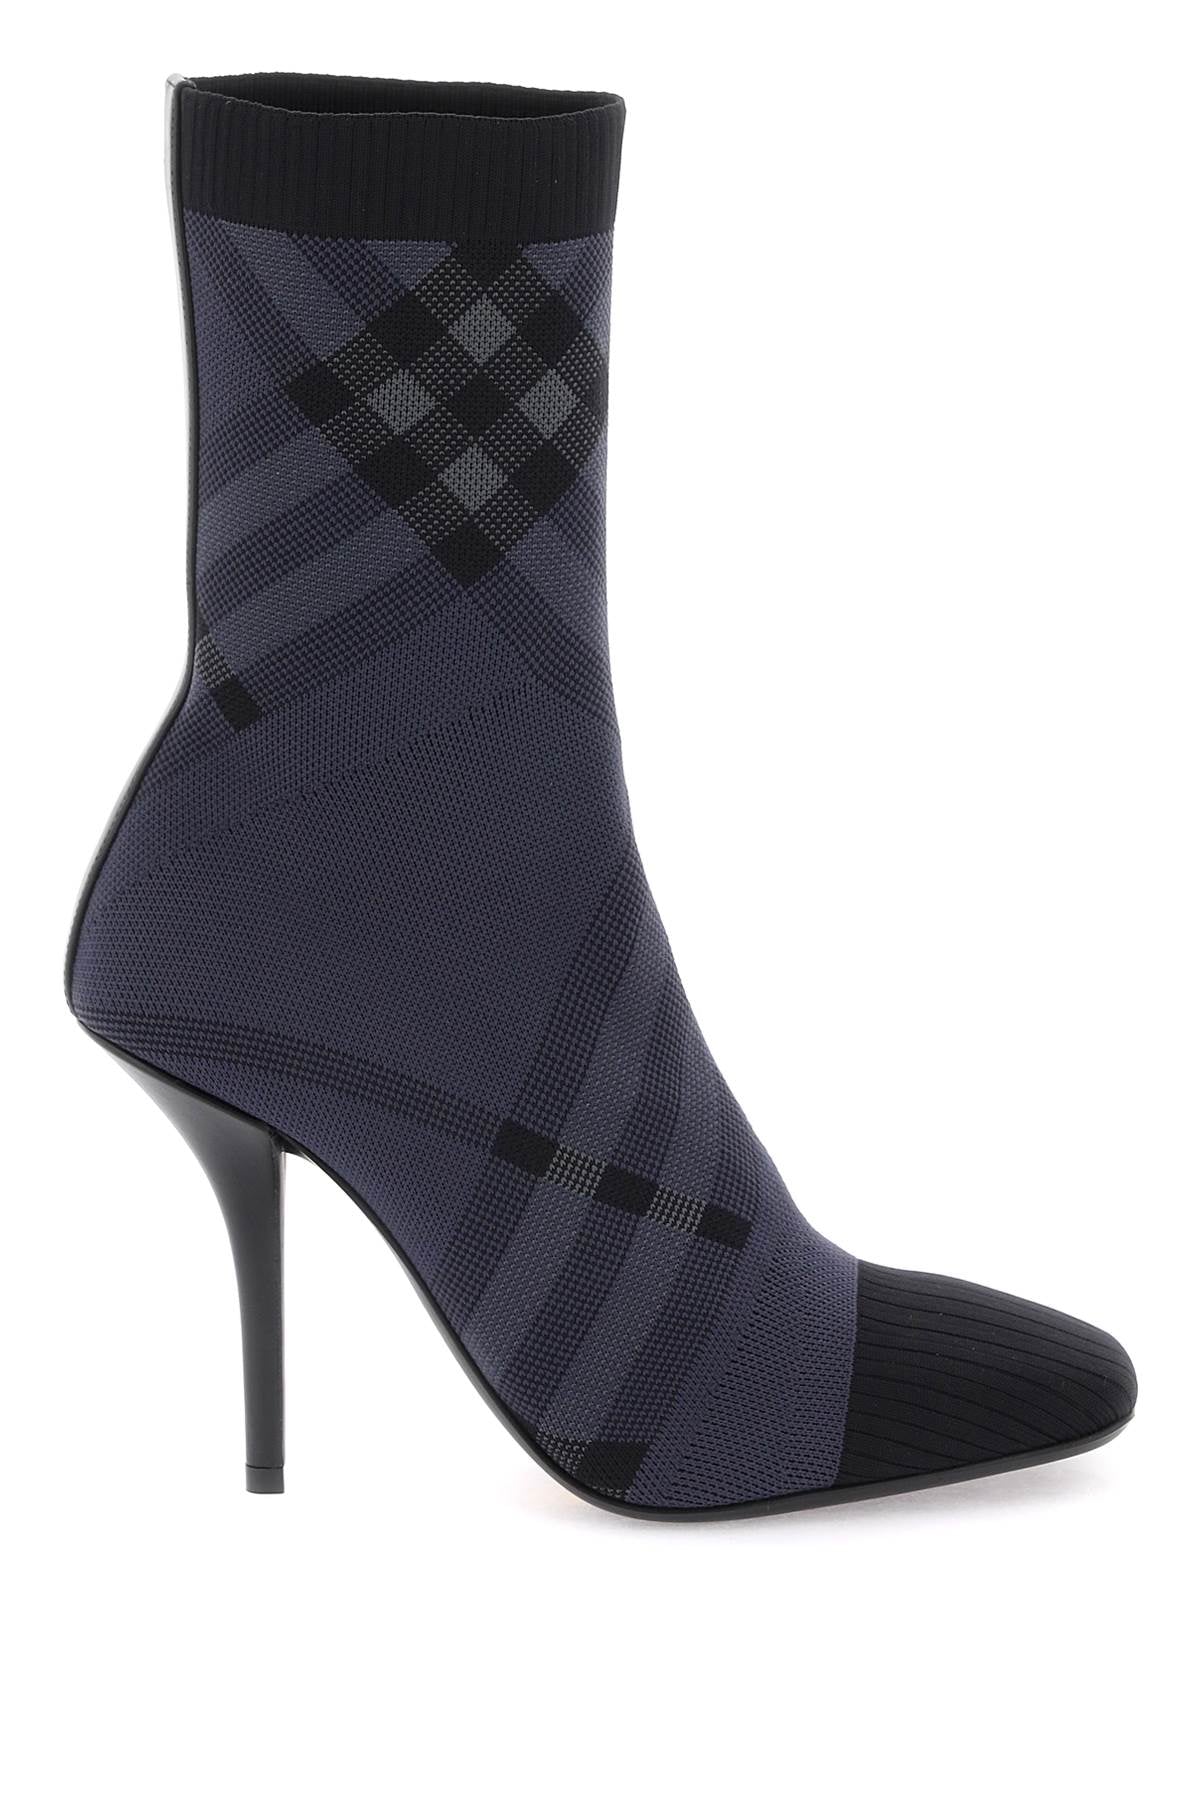 Burberry burberry check knit ankle boots 8069208 CHARCOAL GREY IP CHK